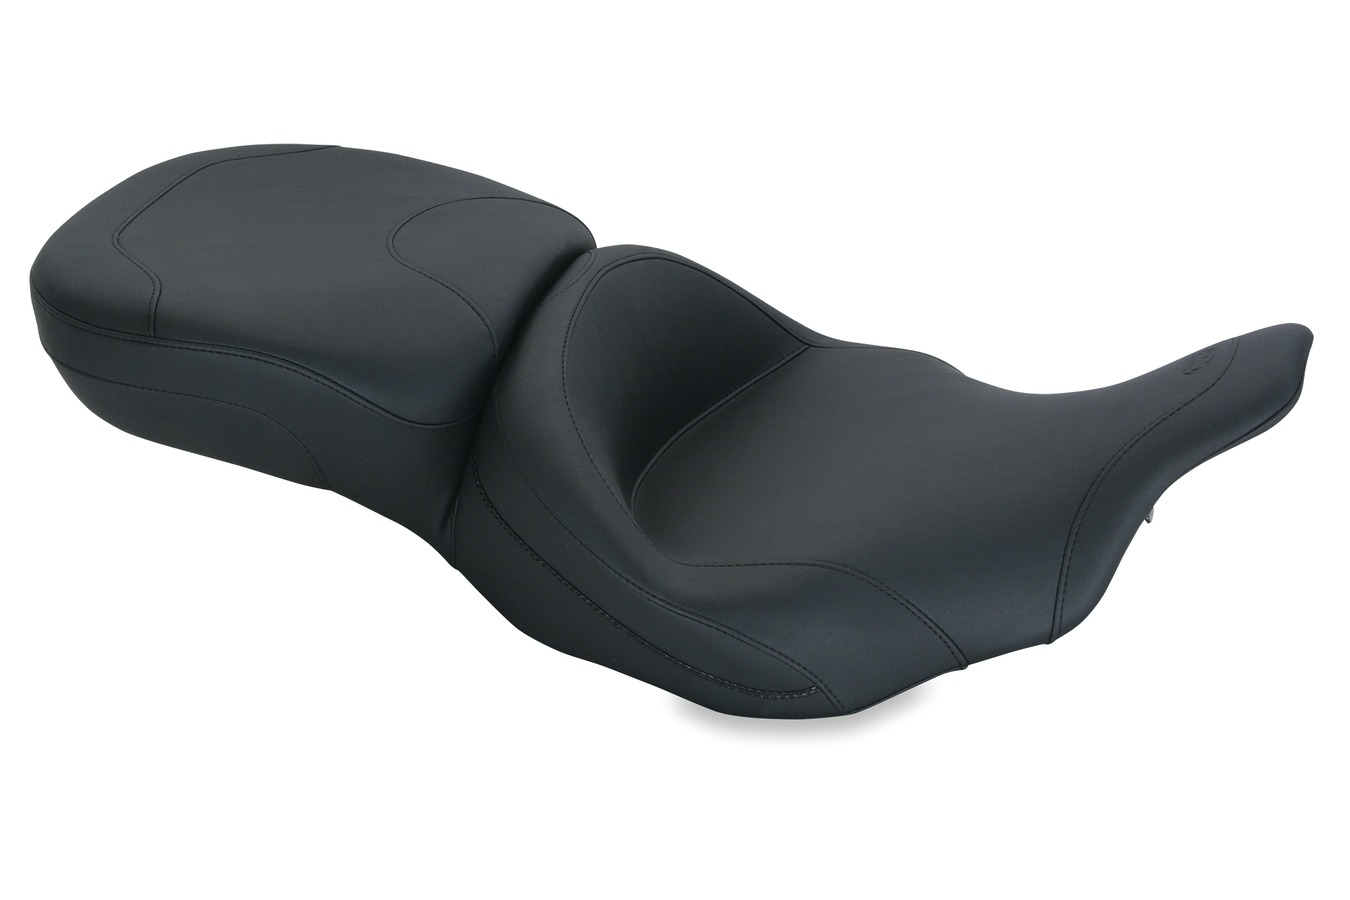 Super Touring One-Piece Seat for Harley-Davidson Electra Glide & Road Glide 1997-